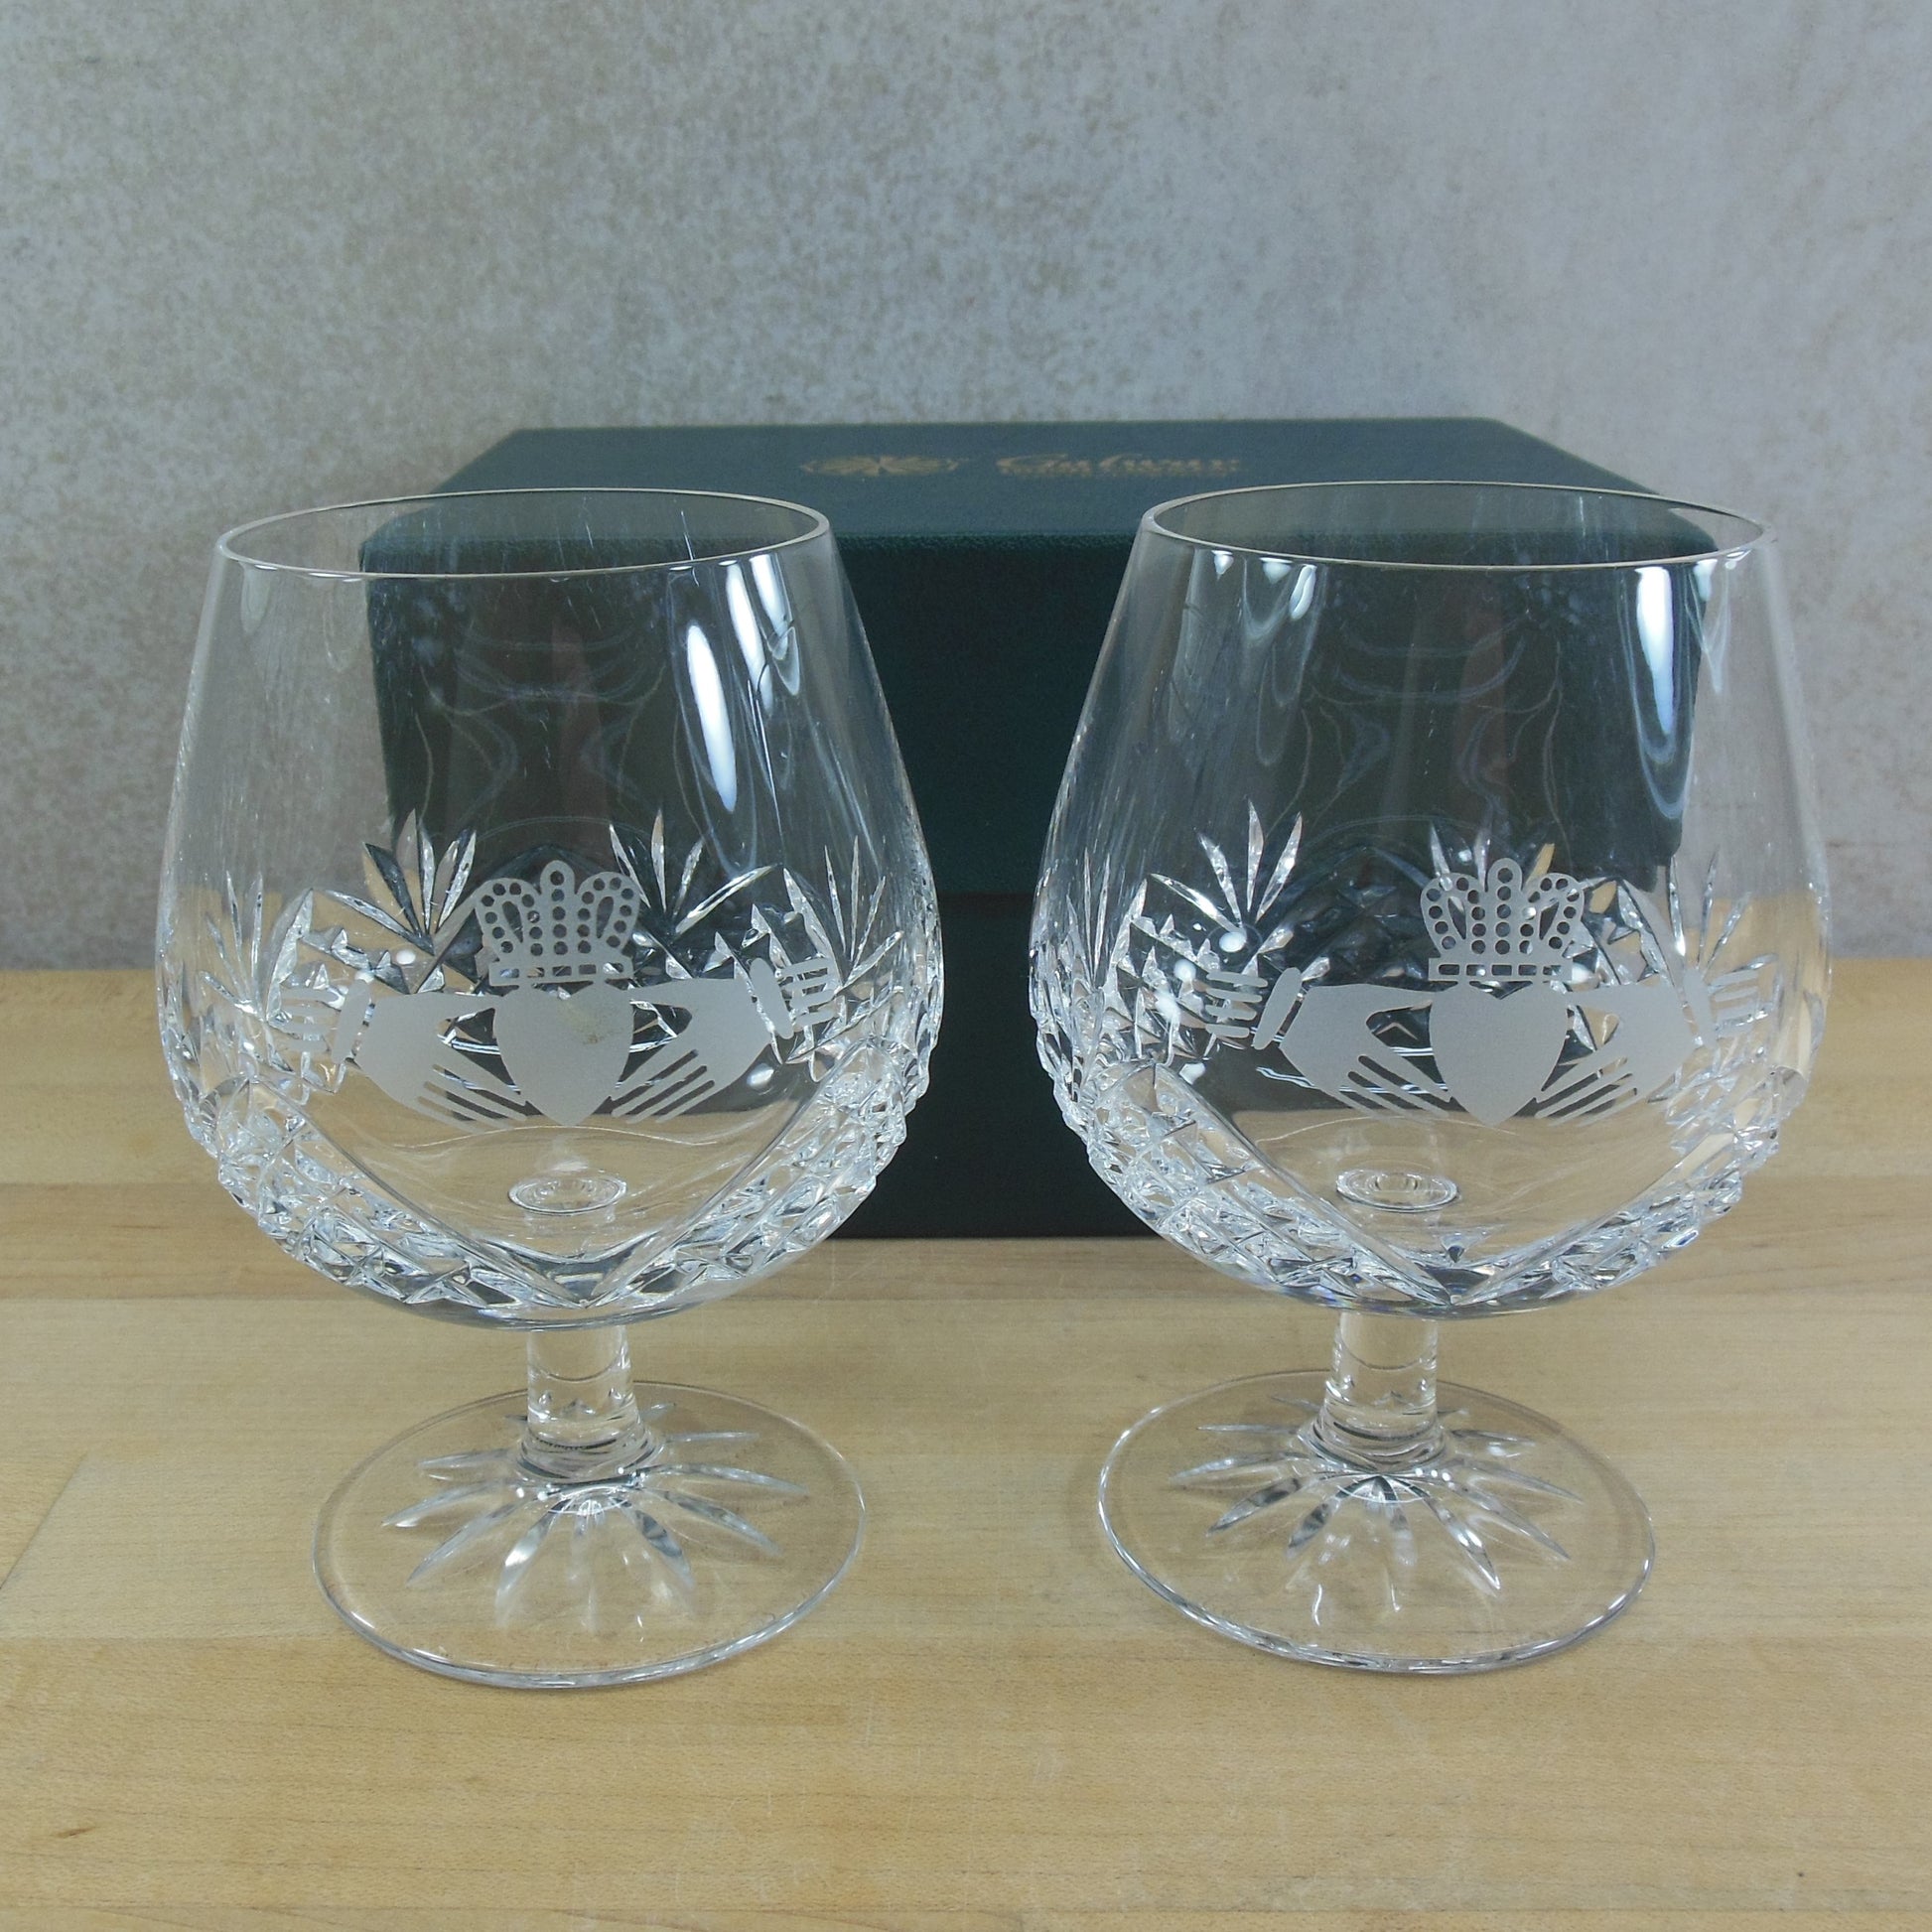 Galway Irish Crystal Claddagh Brandy Snifters Boxed Heart Hands